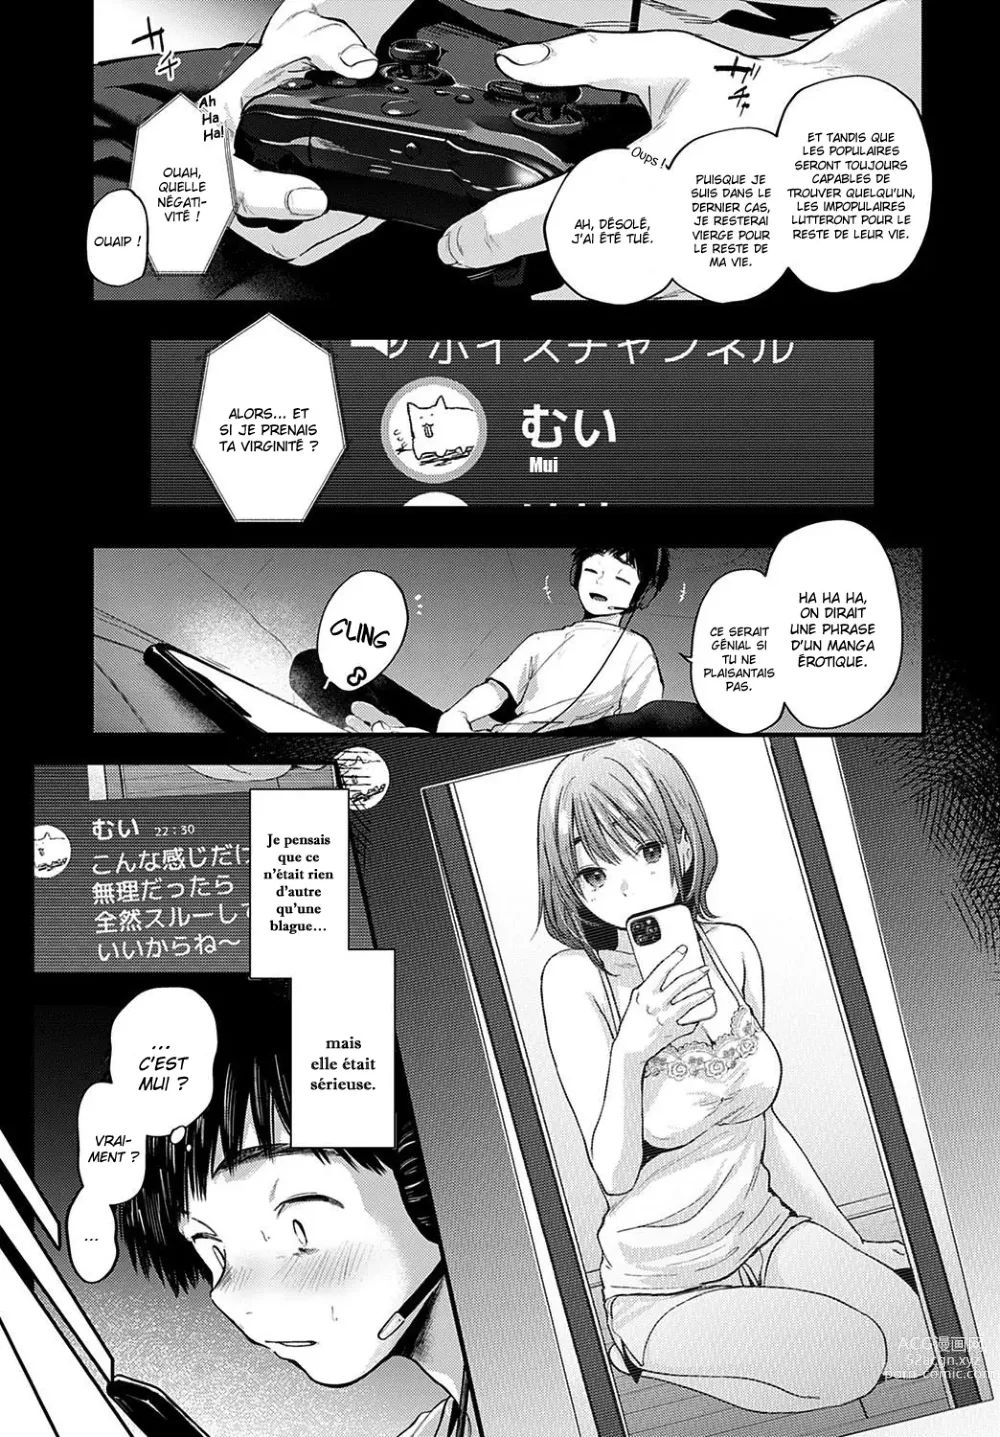 Page 3 of manga Tokyo Expedition Off-line Sex Report